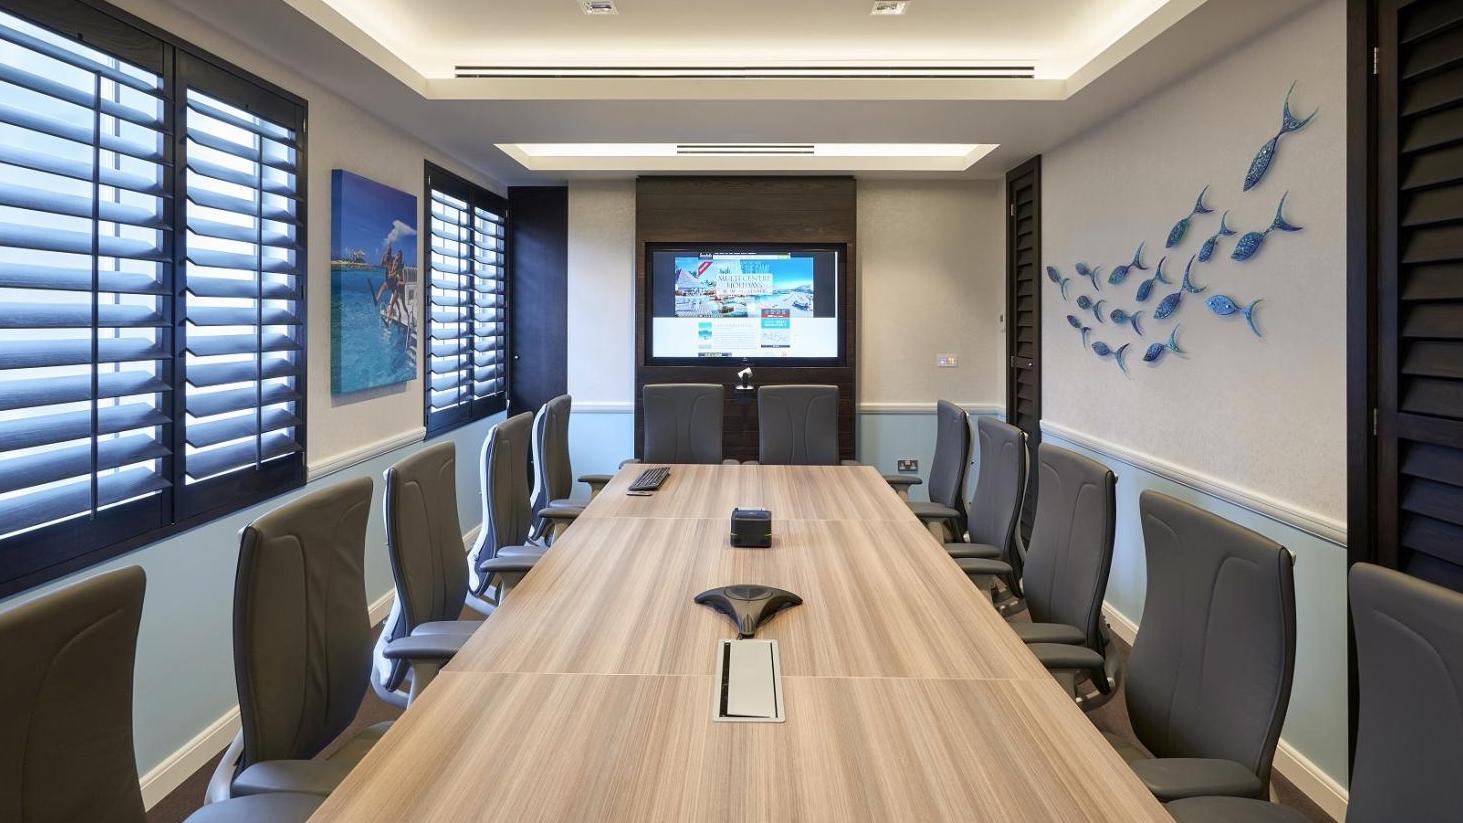 Find your Meeting Room in Chelsea